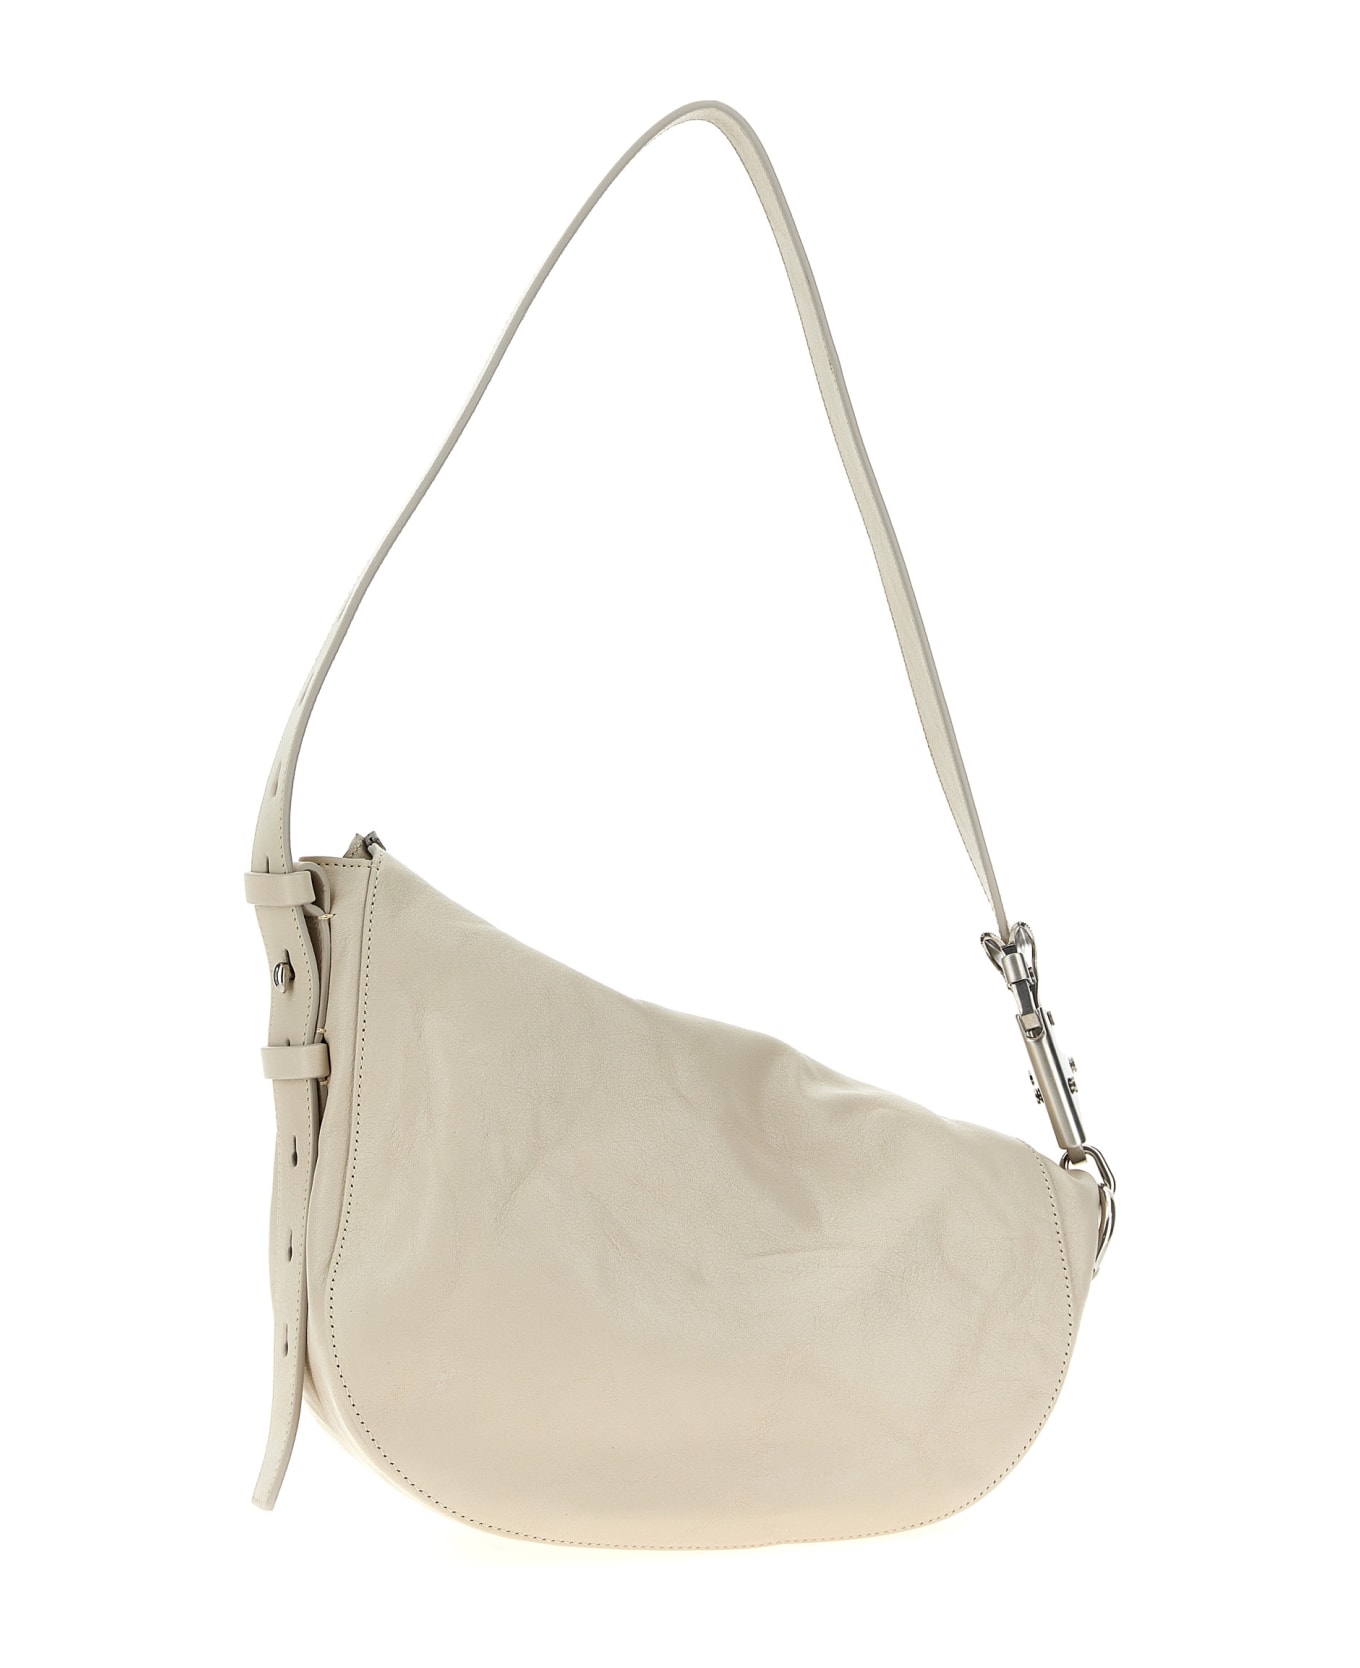 Burberry 'knight' Small Shoulder Bag - Beige